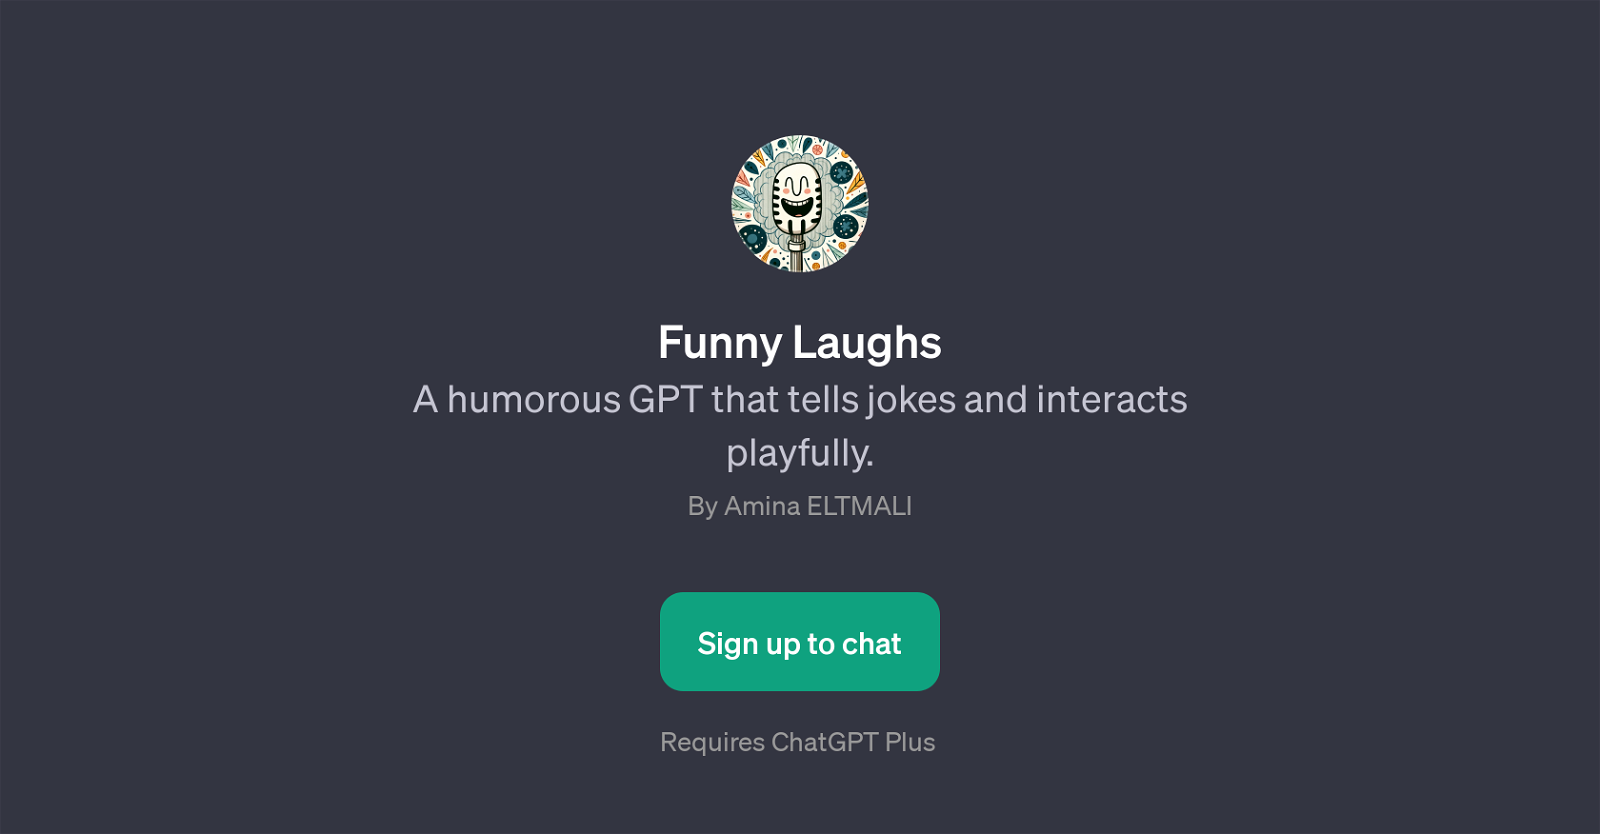 Funny Laughs website